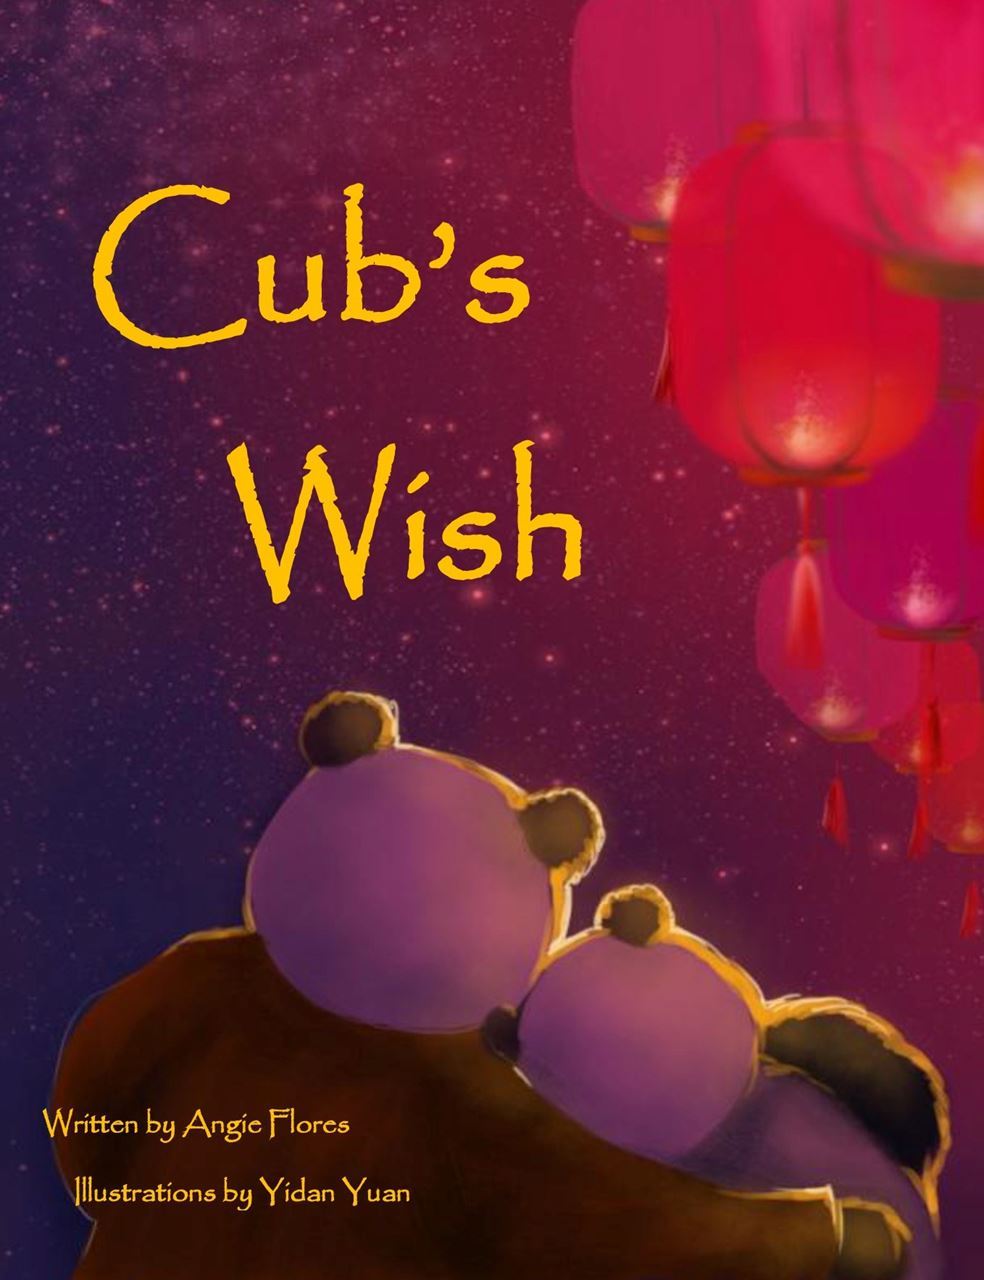 Cub's Wish picture book by Angie Flores